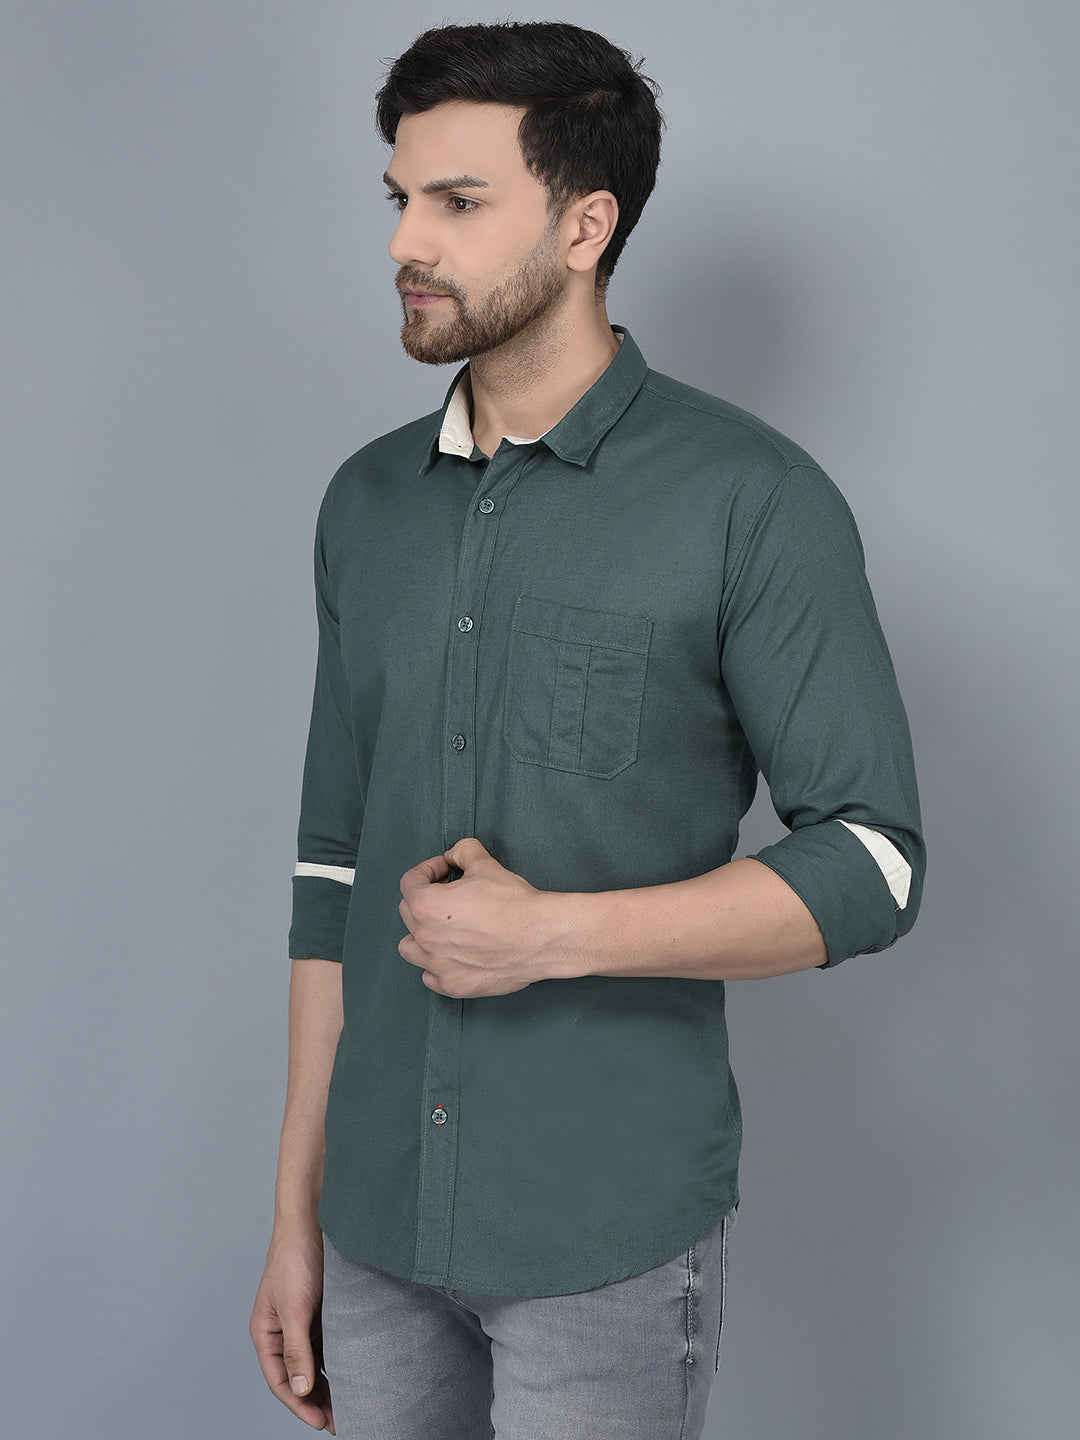 Cobb Green Solid Slim Fit Casual Shirt